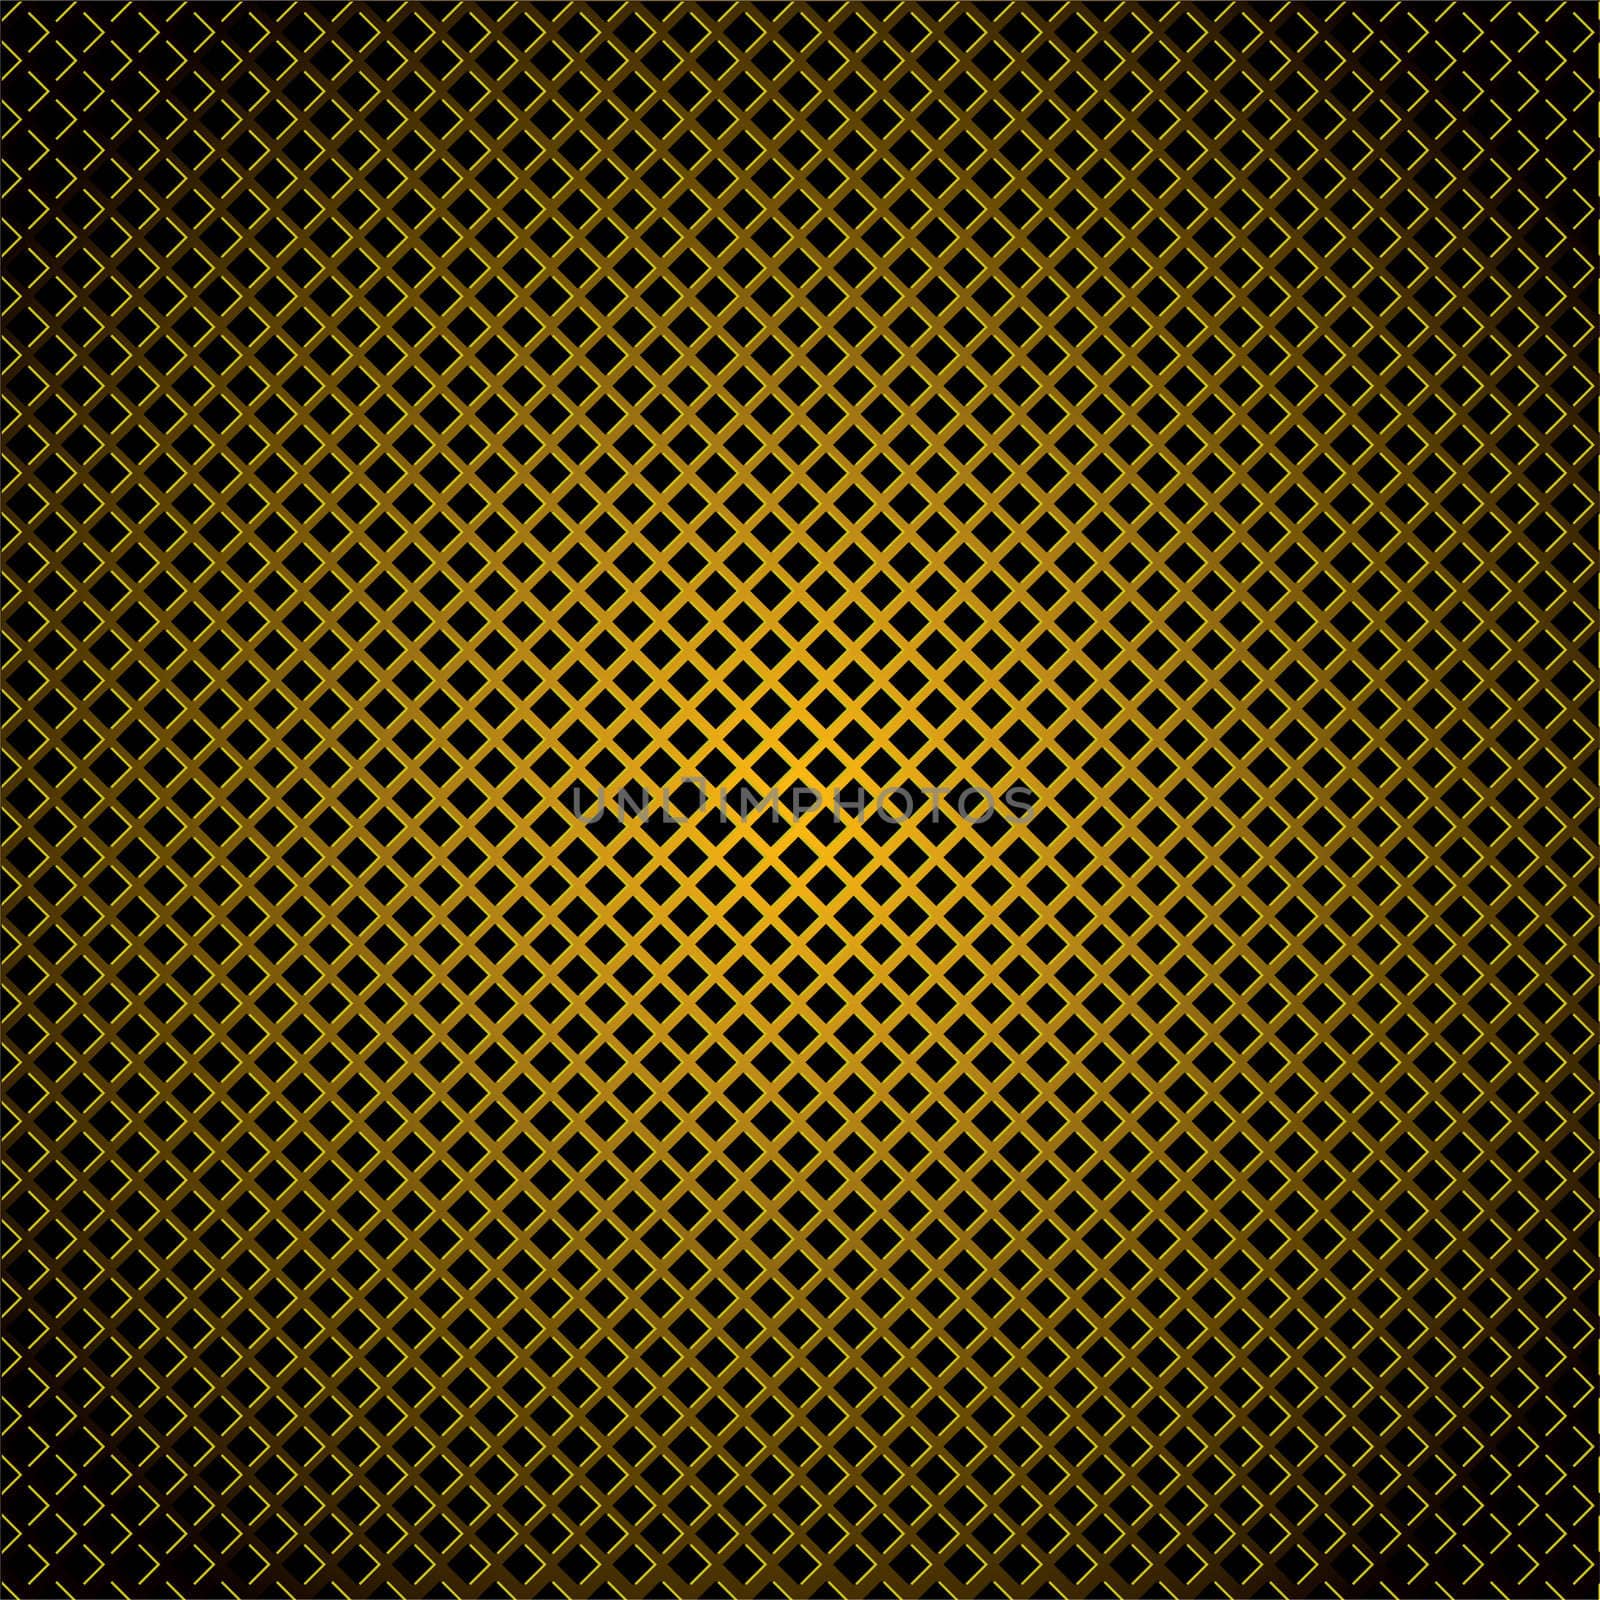 golden diamond pattern background with highlight edges and shadow